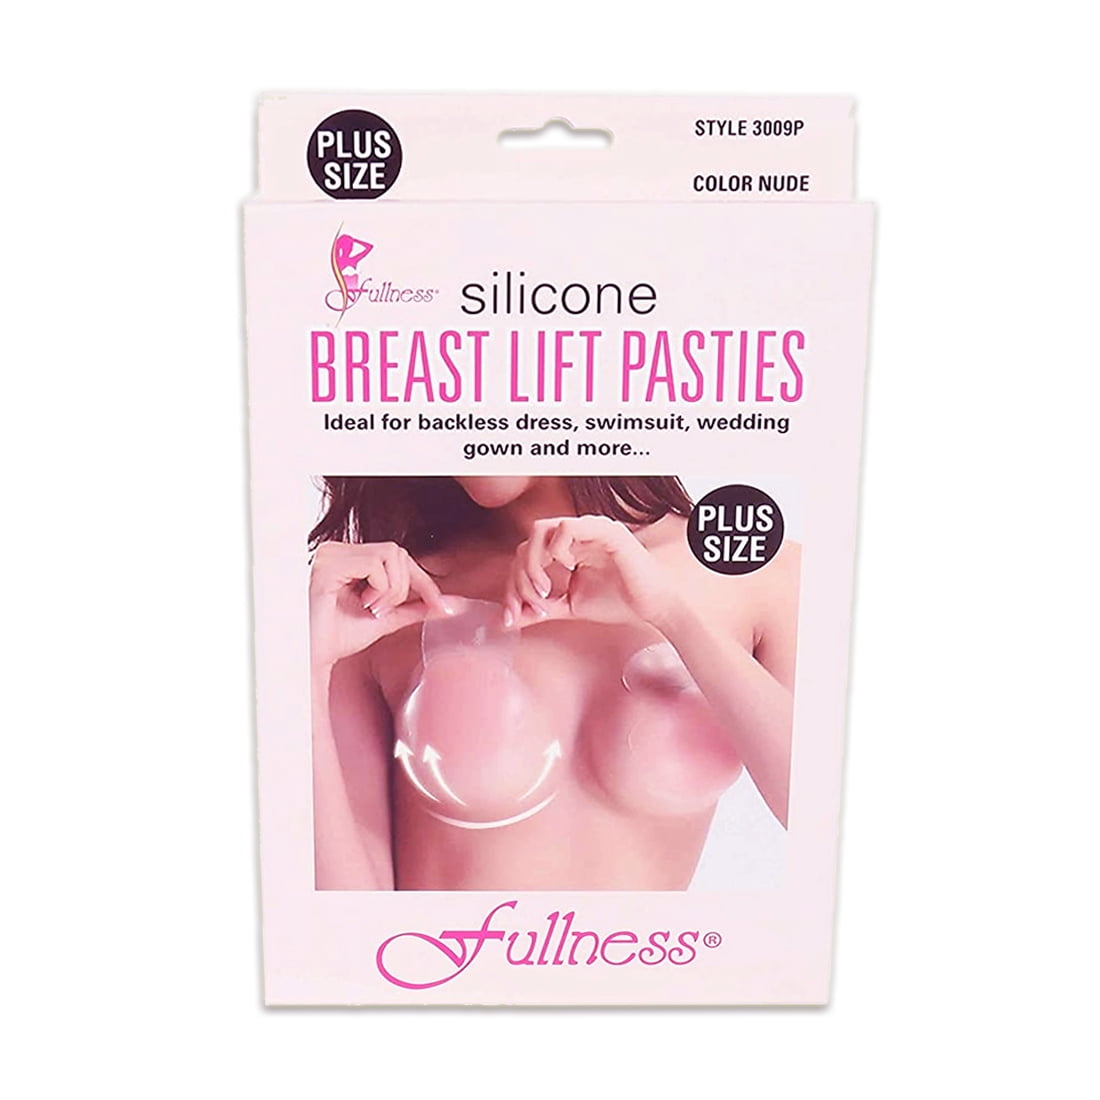 Fullness Silicone Breast Lift Pasties